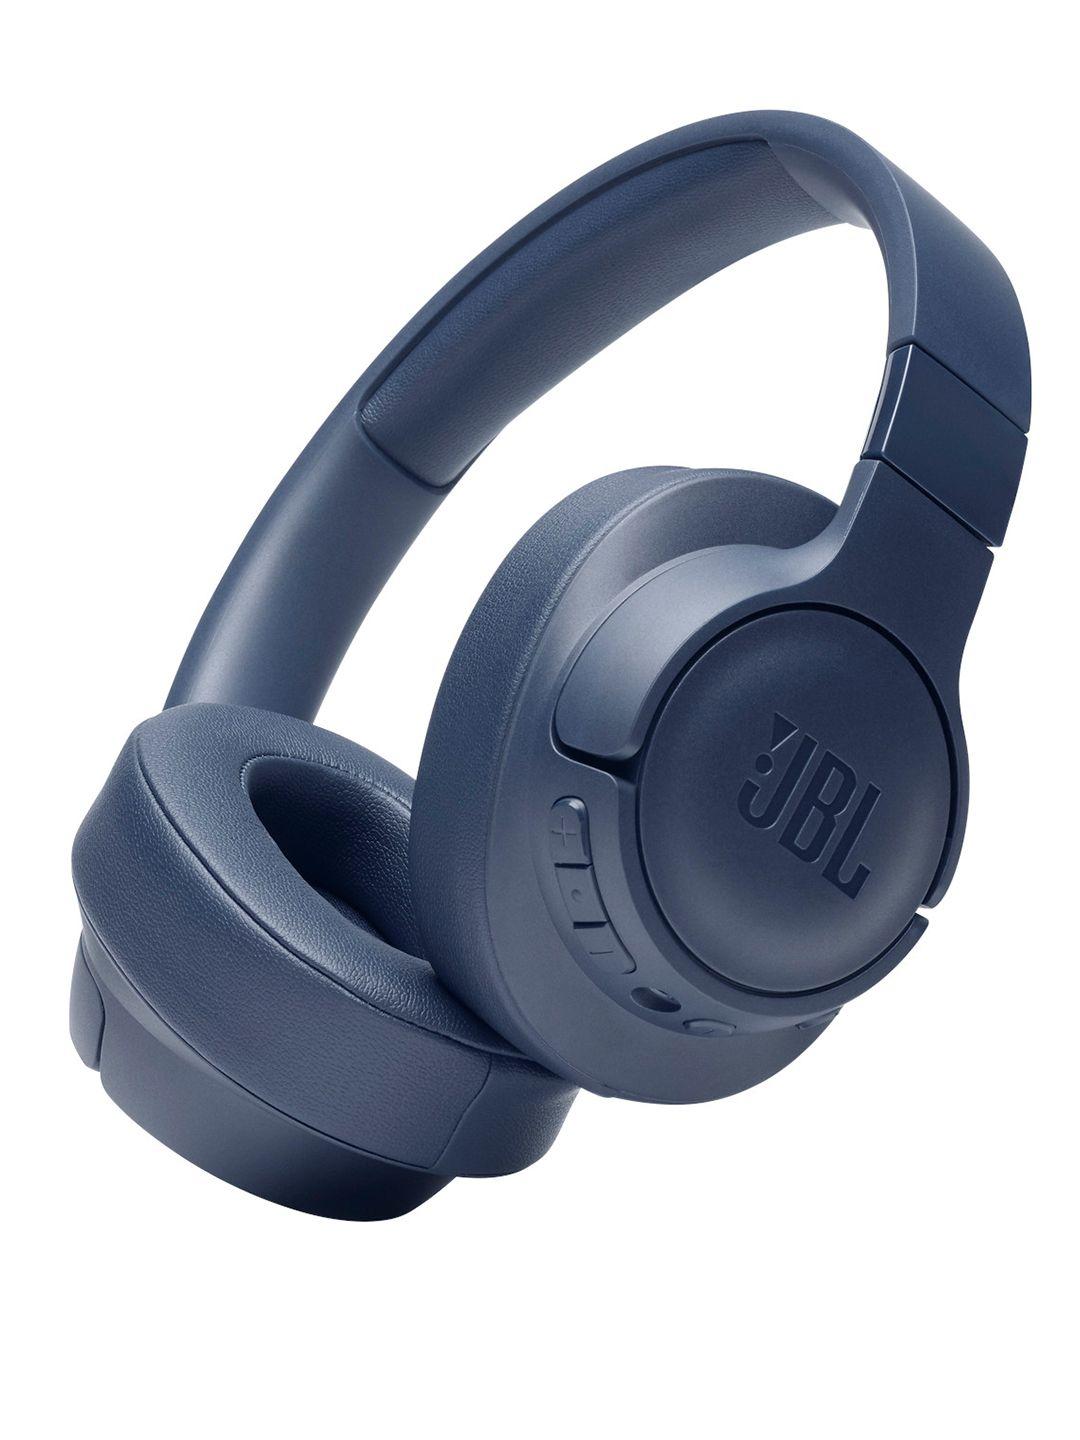 jbl tune 760nc active noise cancellation wireless over ear headphones with mic - blue